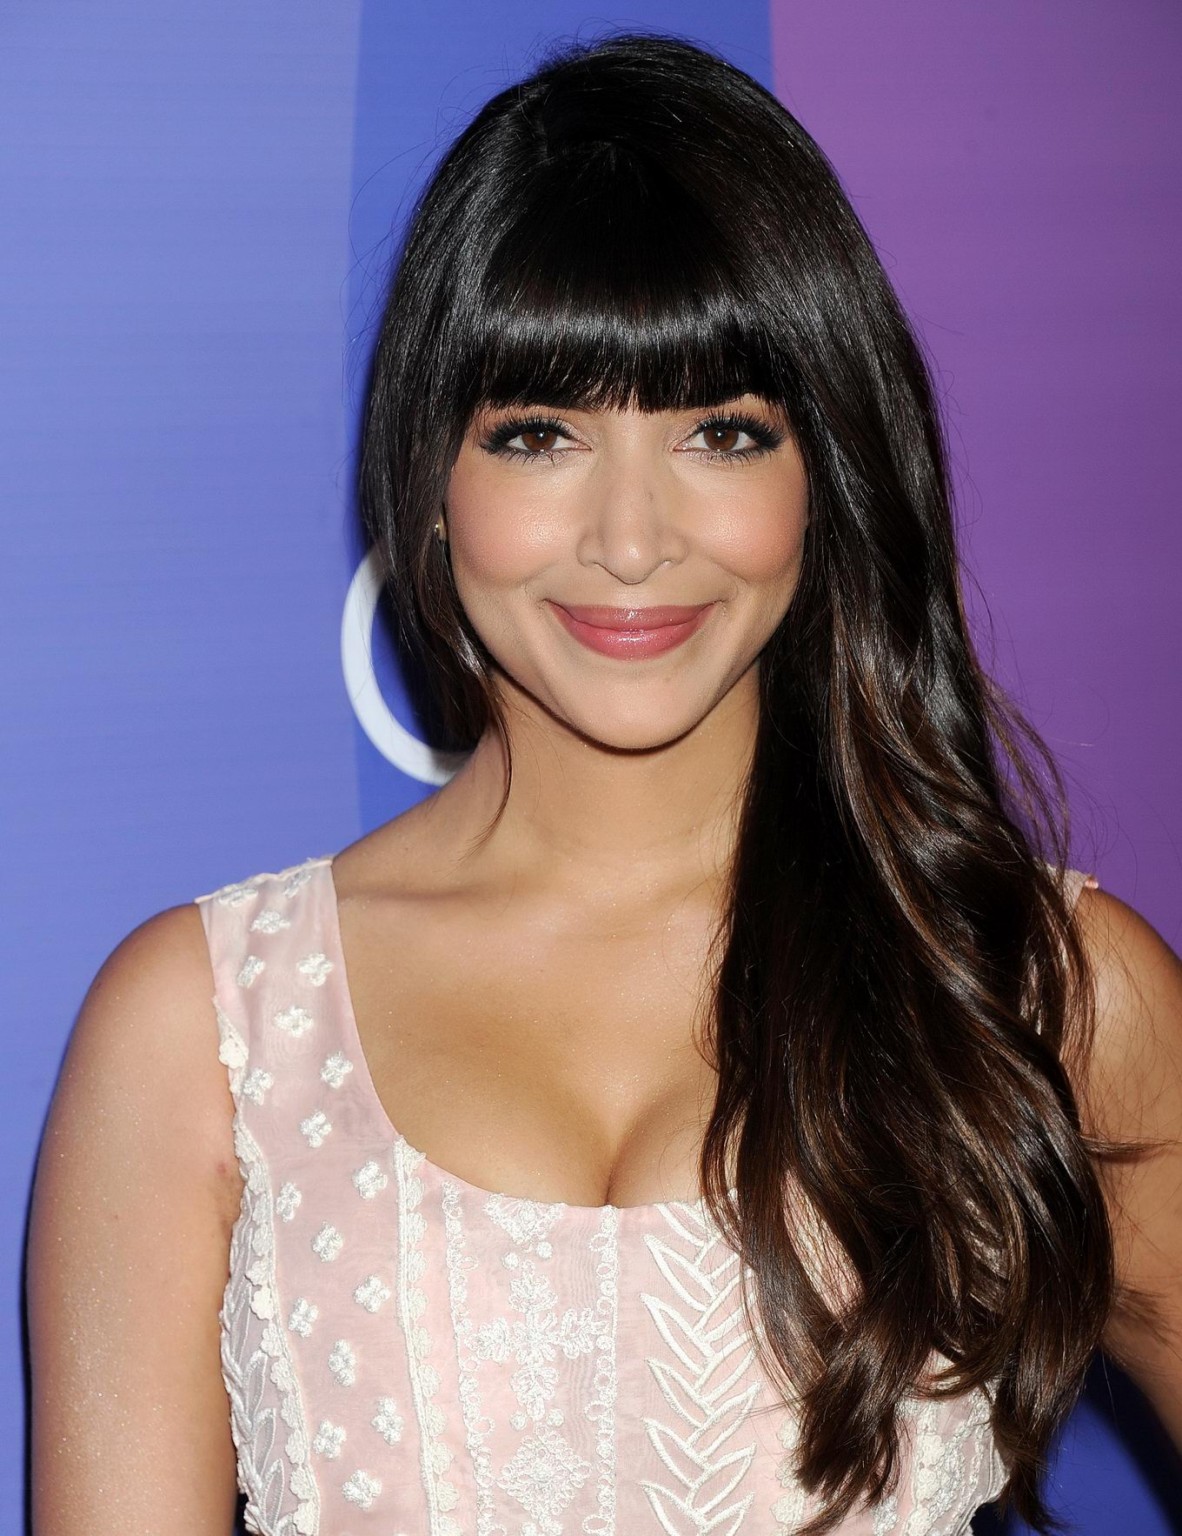 Hannah Simone showing cleavage at the Variety's 5th Annual Power of Women event  #75216861